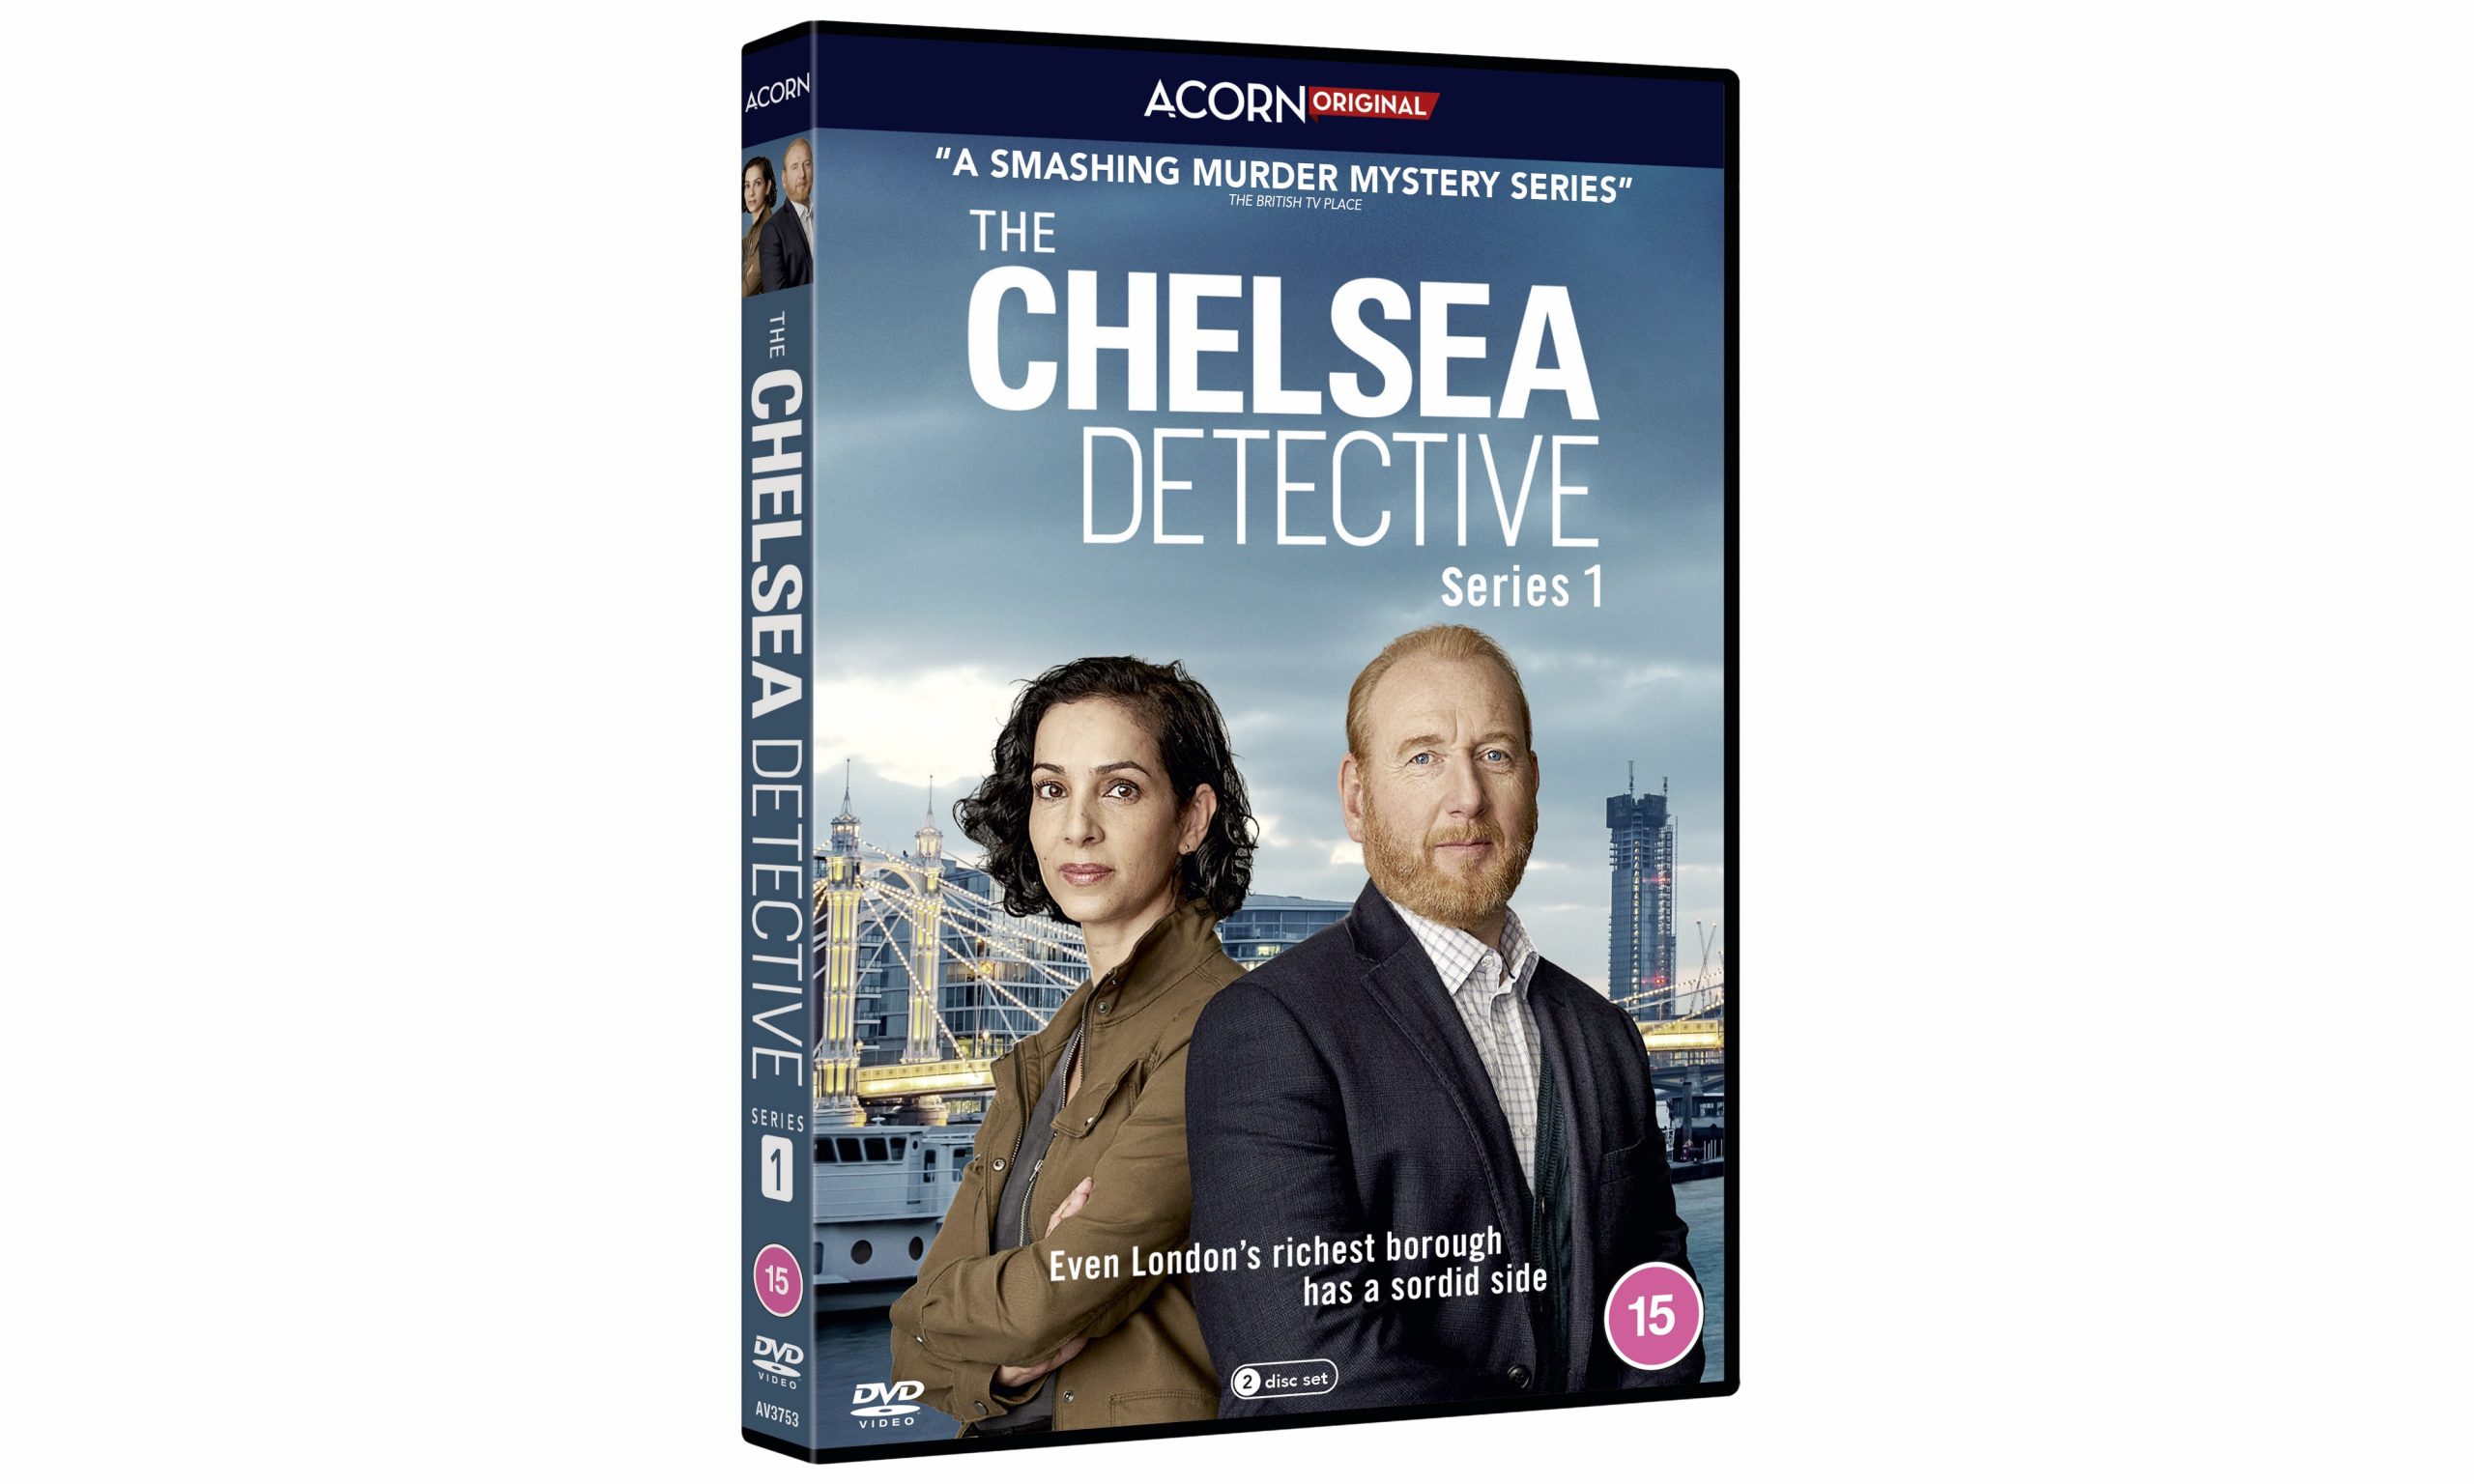 The Chelsea Detective Series One